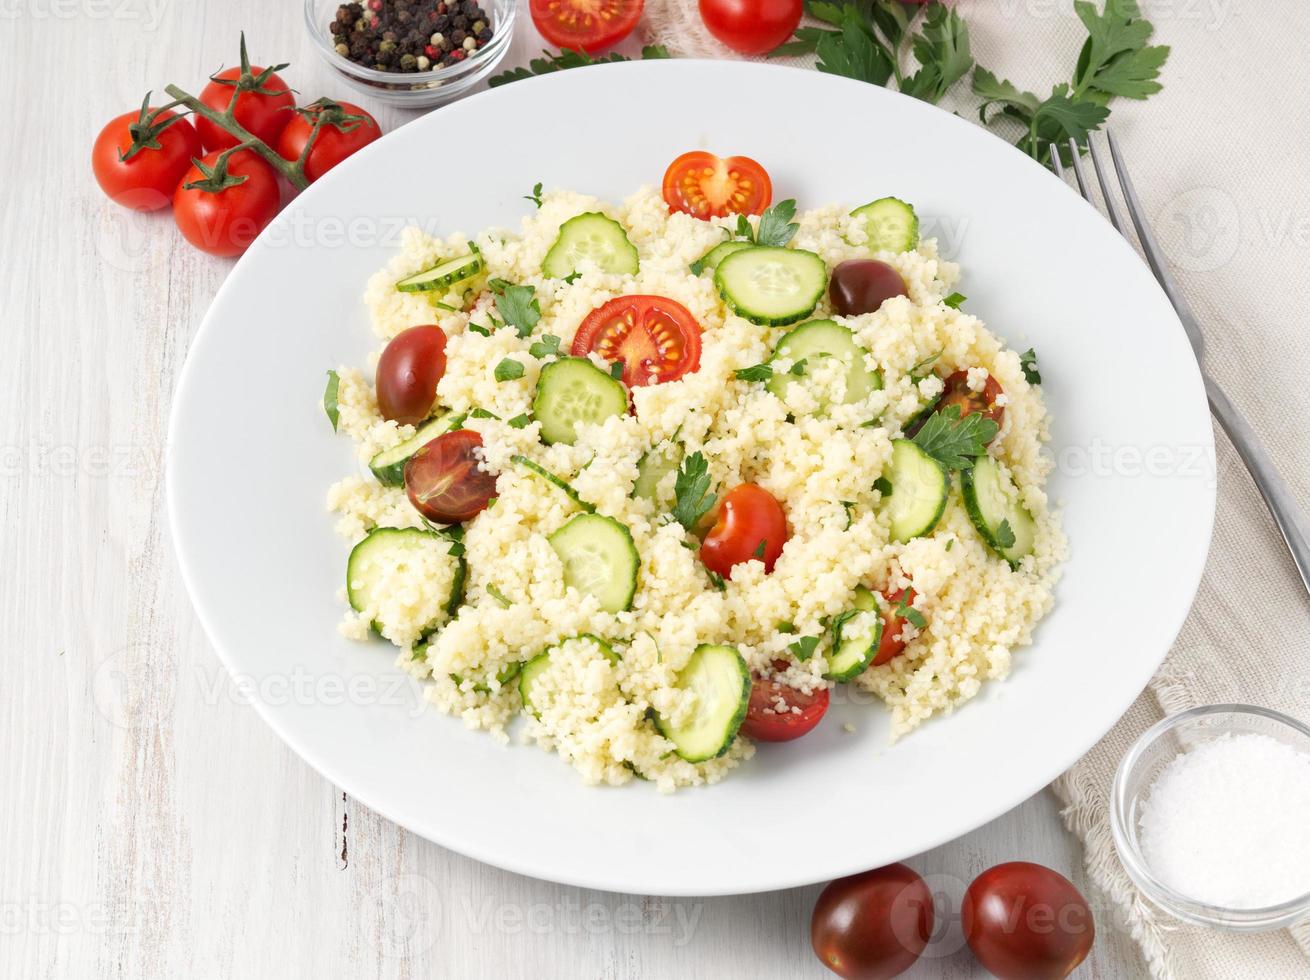 fresh diet vegetable salad with couscous, tomatoes, cucumbers, parsley, white wooden table, side view photo